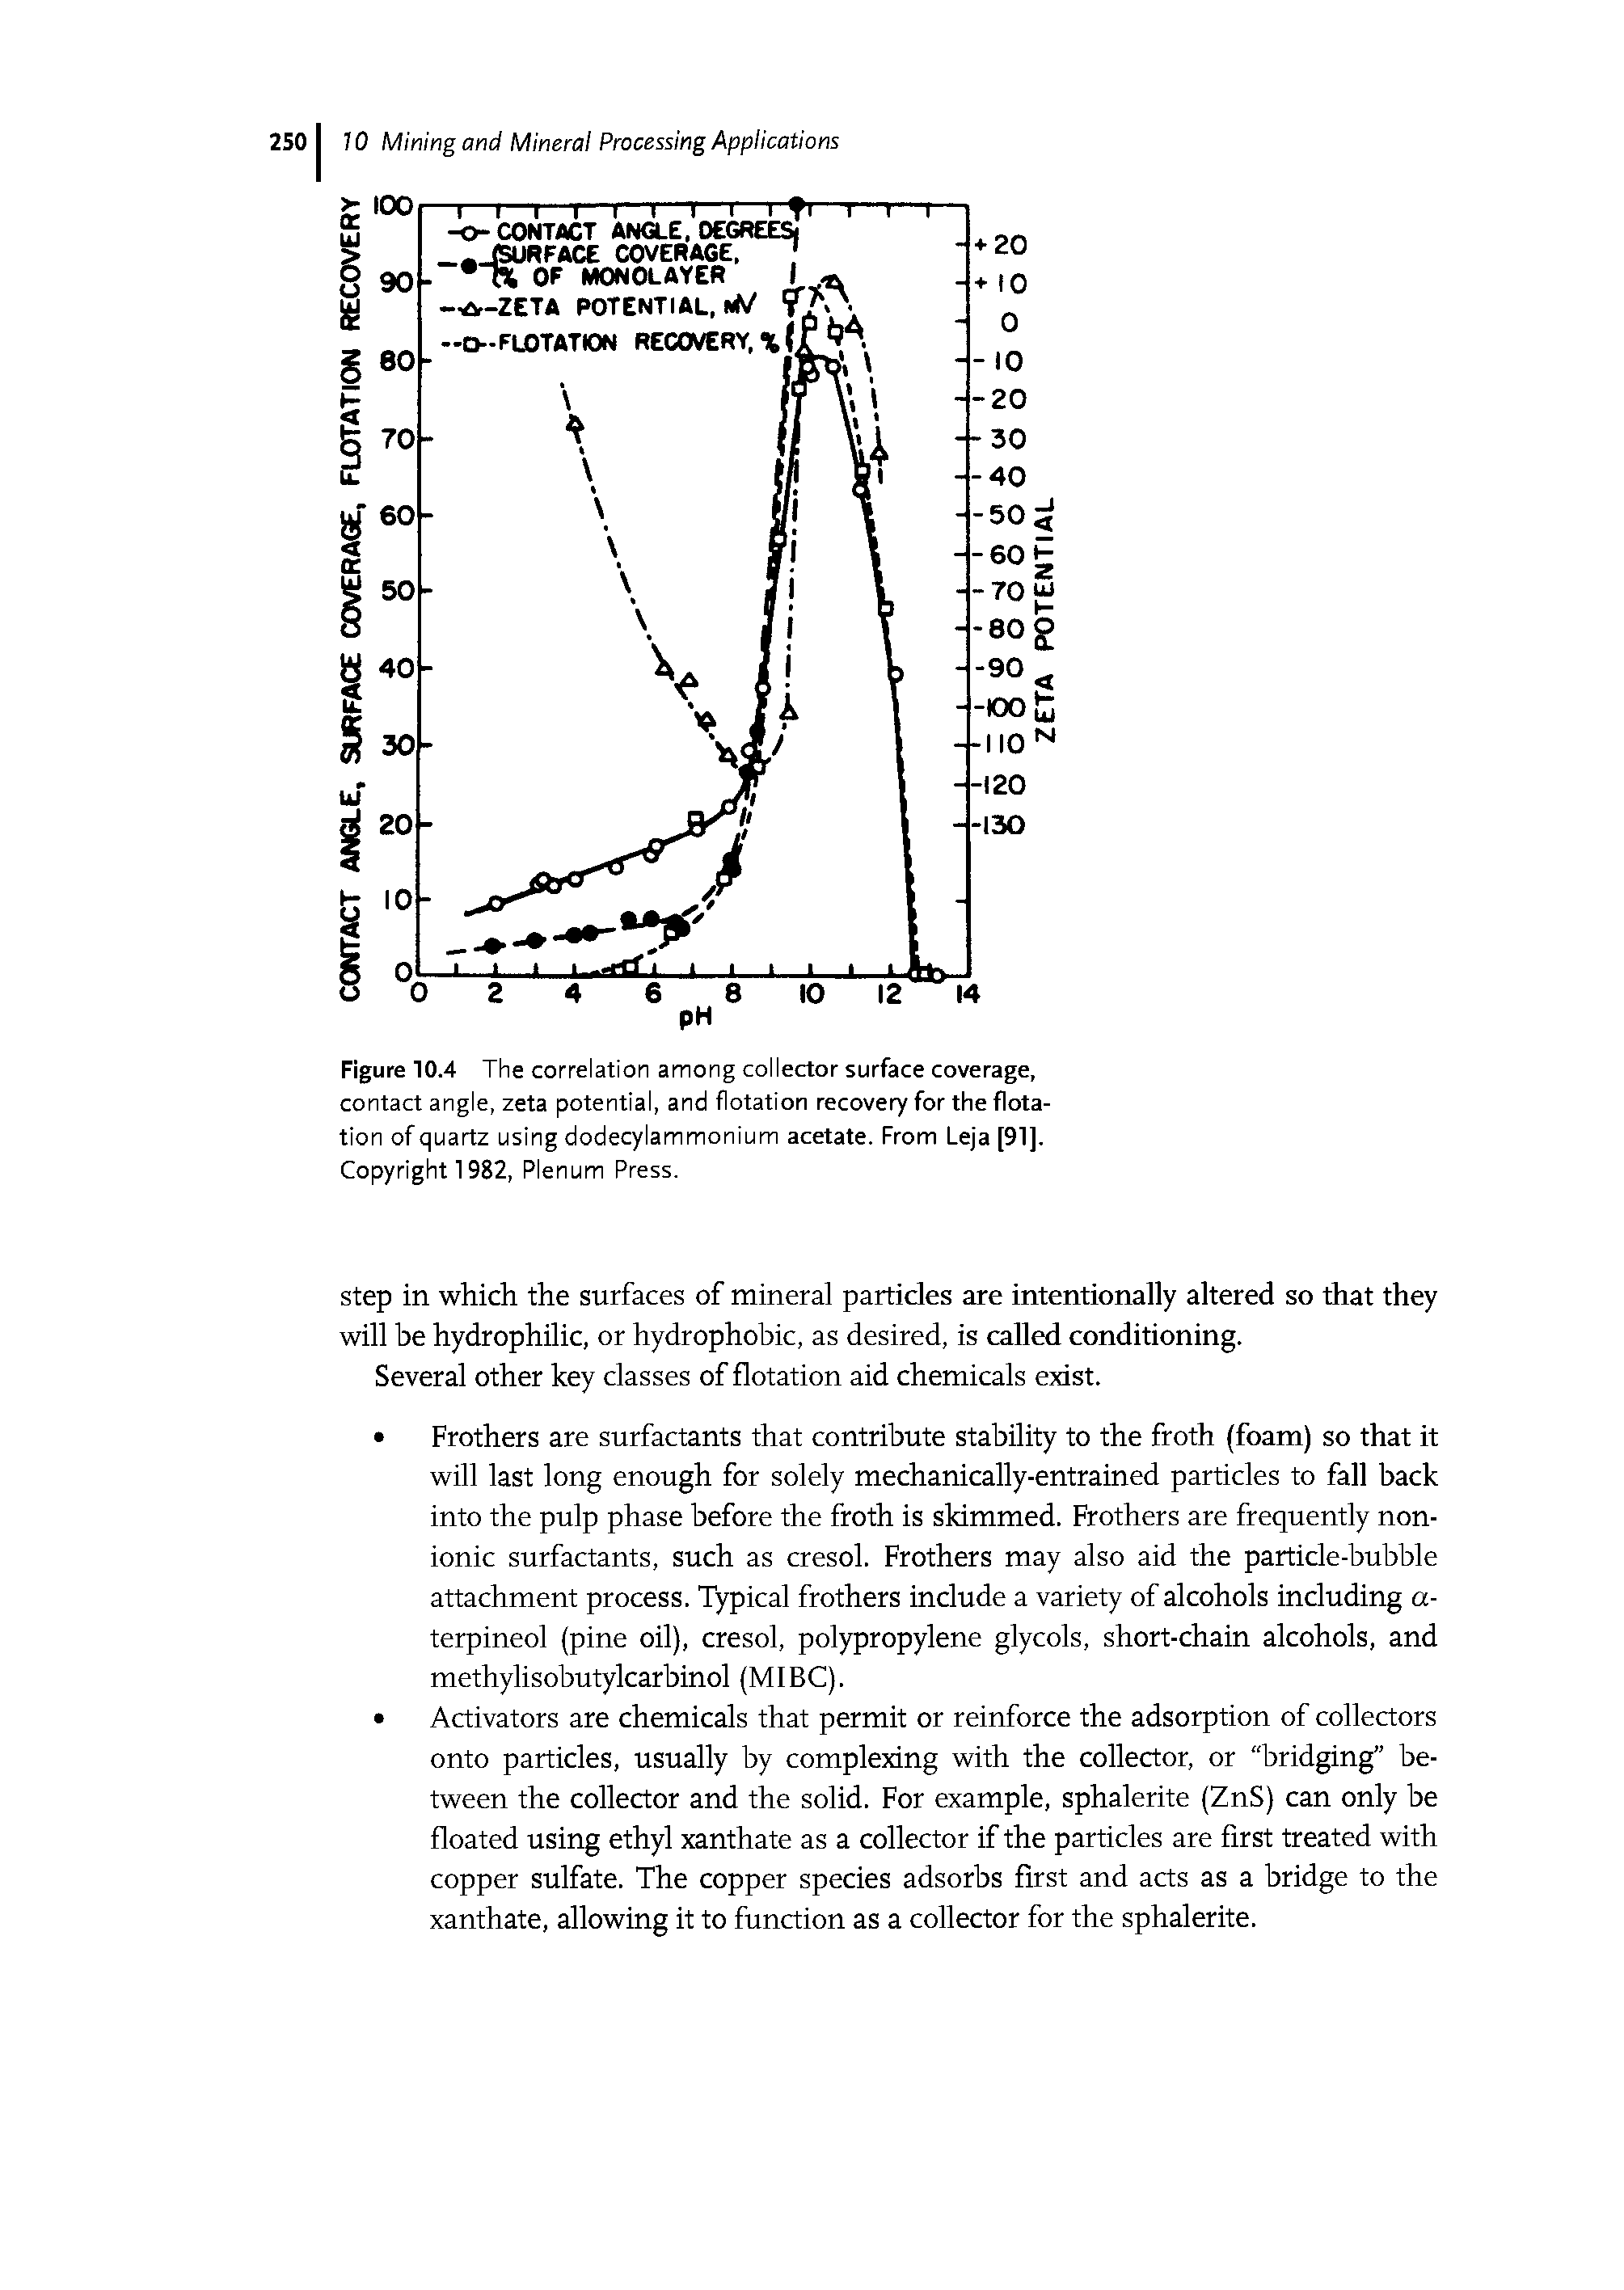 Figure 10.4 The correlation among collector surface coverage, contact angle, zeta potential, and flotation recovery for the flotation of quartz using dodecylammonium acetate. From Leja [91]. Copyright 1982, Plenum Press.